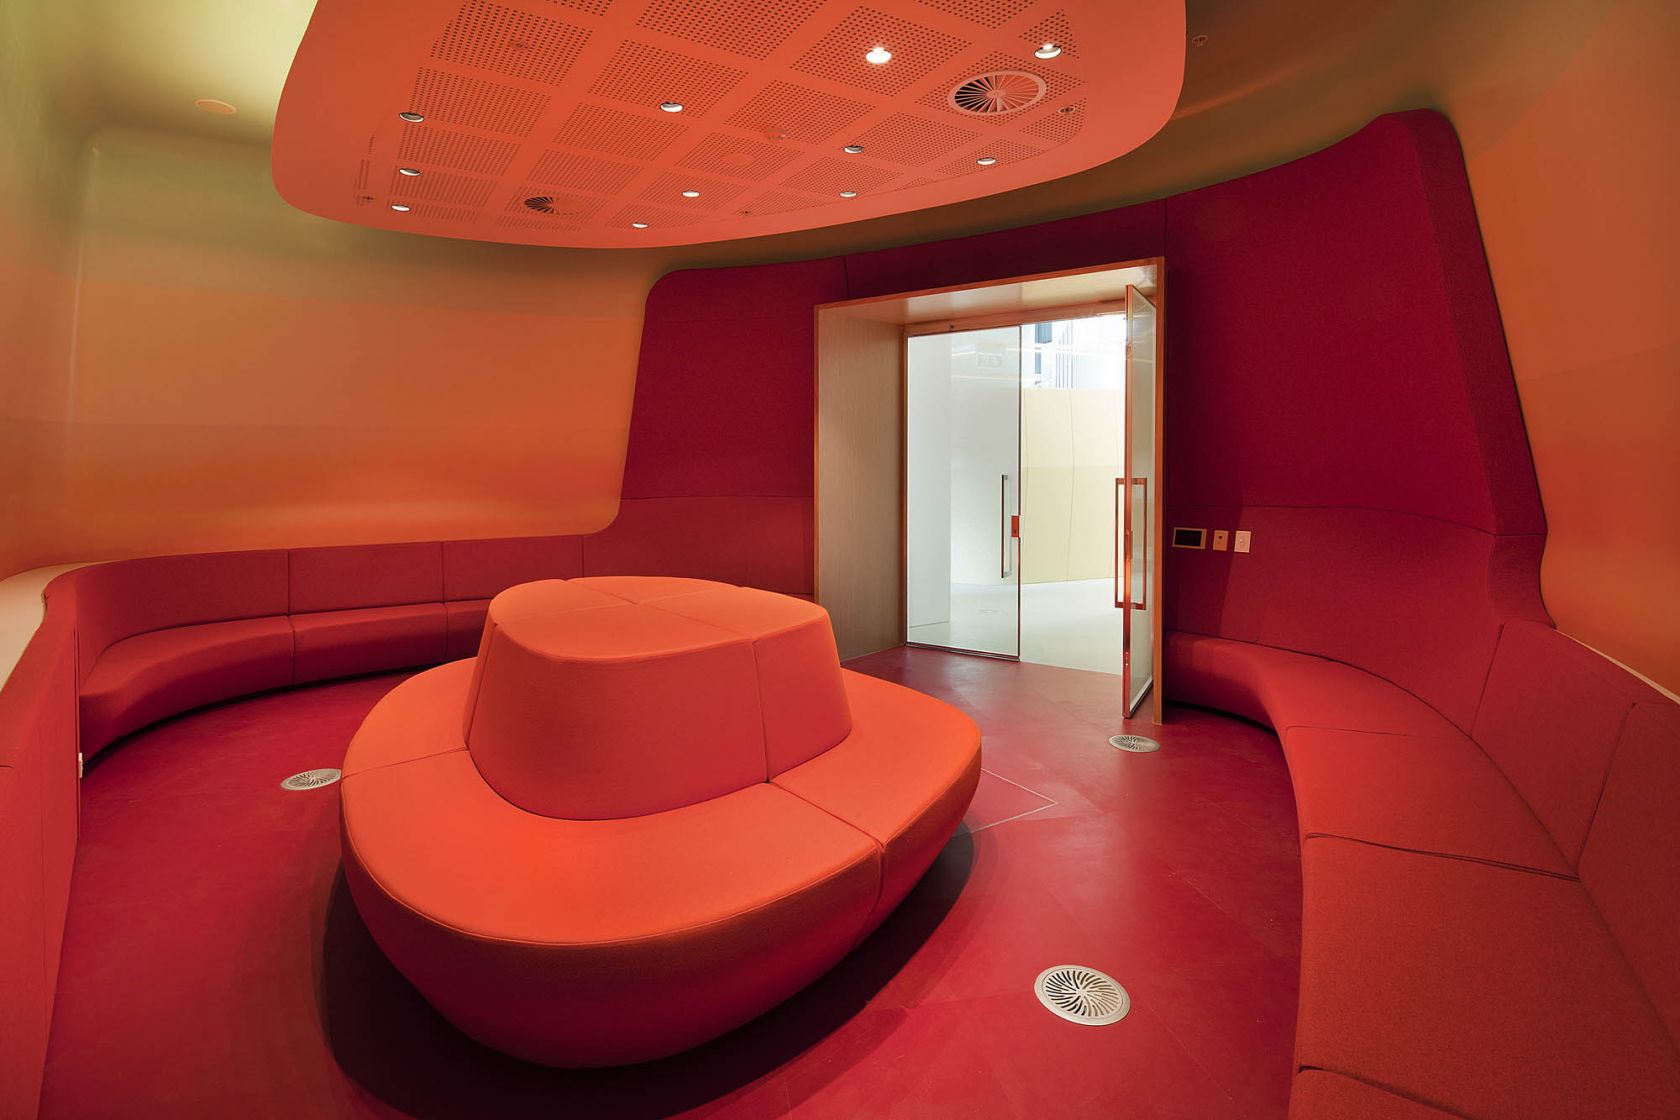 medibank melbourne fitout red lounge